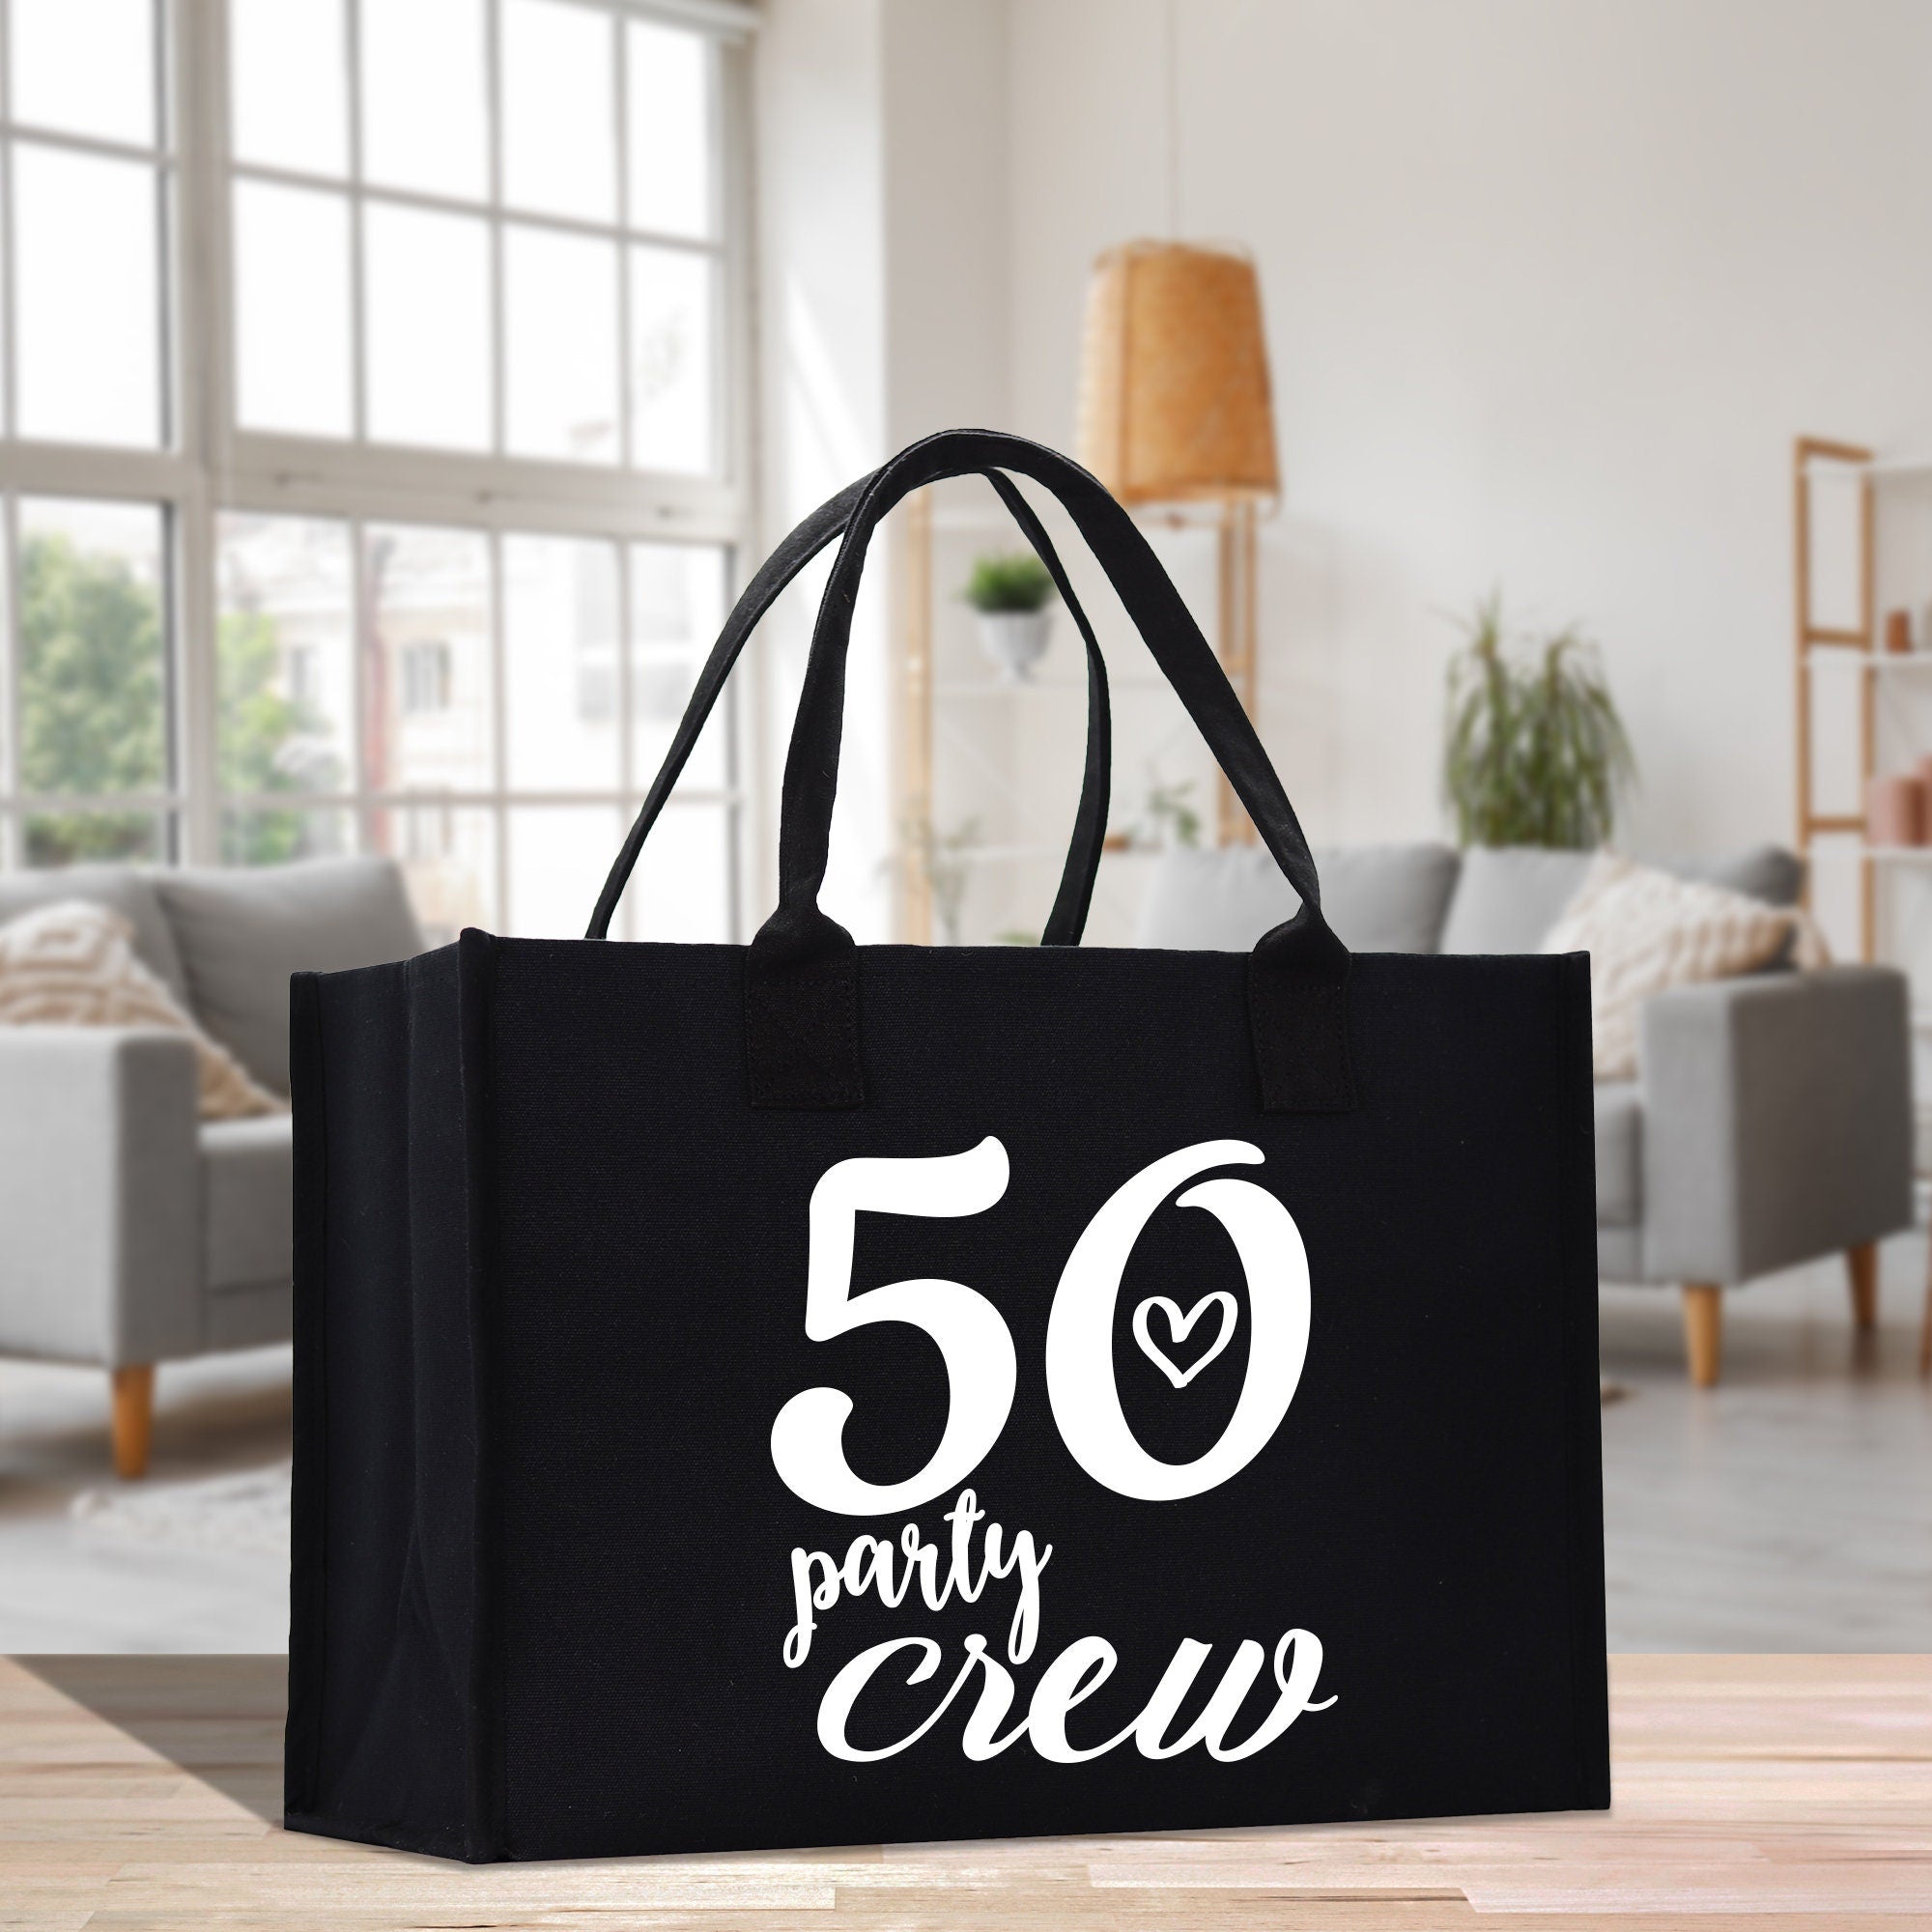 a black bag with the number 50 printed on it